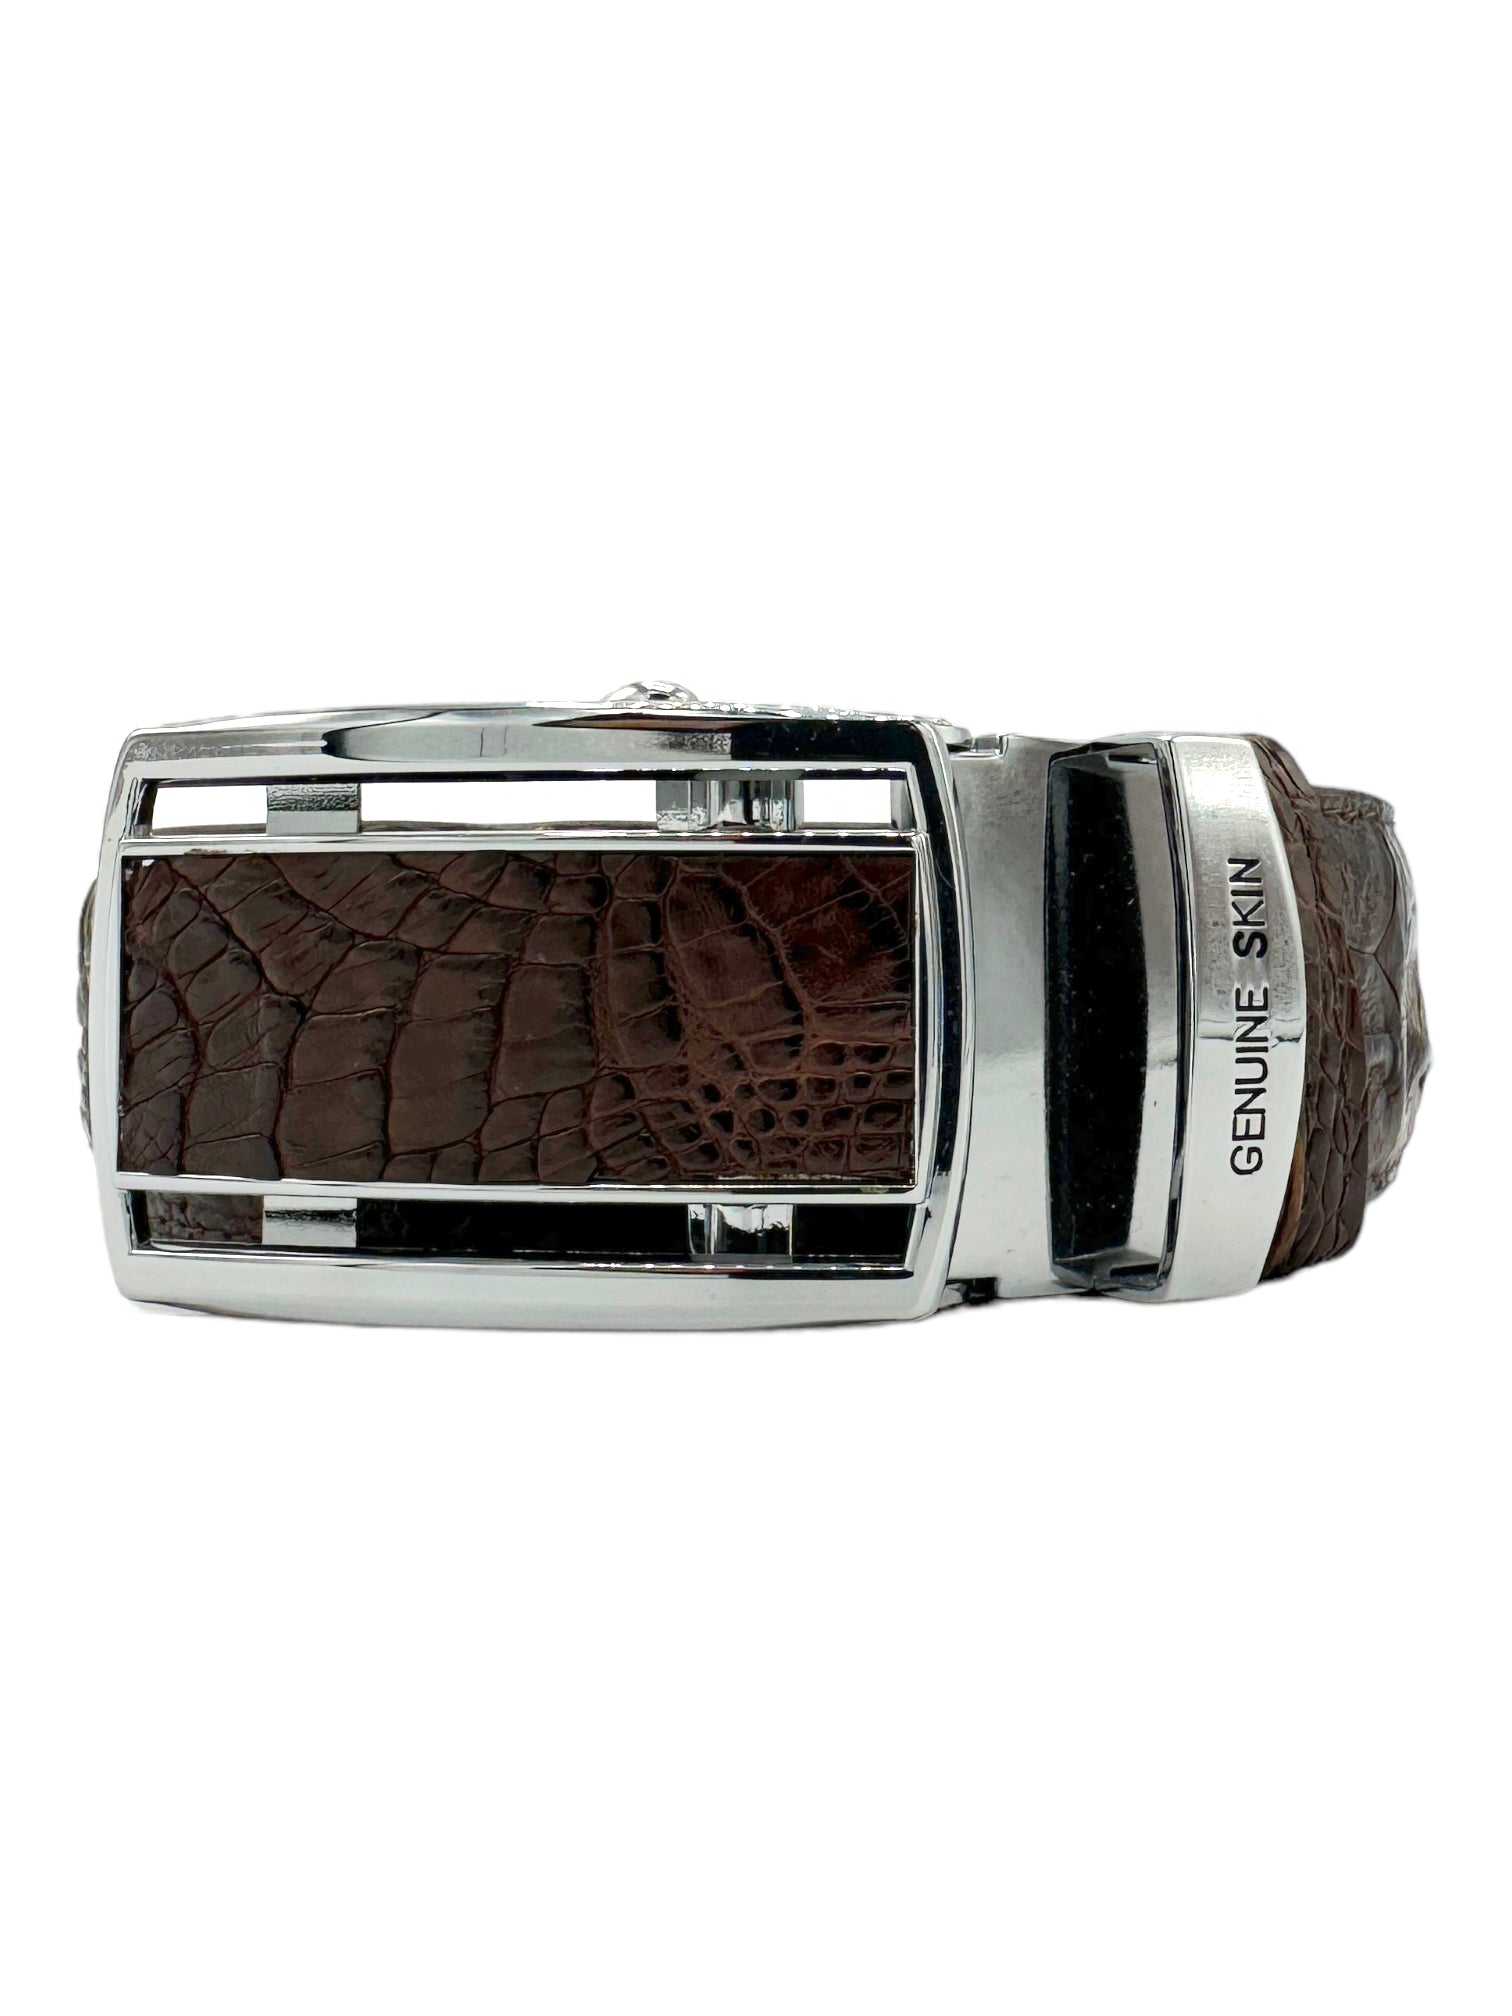 River Crocodile Skin Hornback Soft Skin Brown Belt - Genuine Design luxury consignment Calgary, Alberta, Canada New and pre-owned clothing, shoes, accessories.